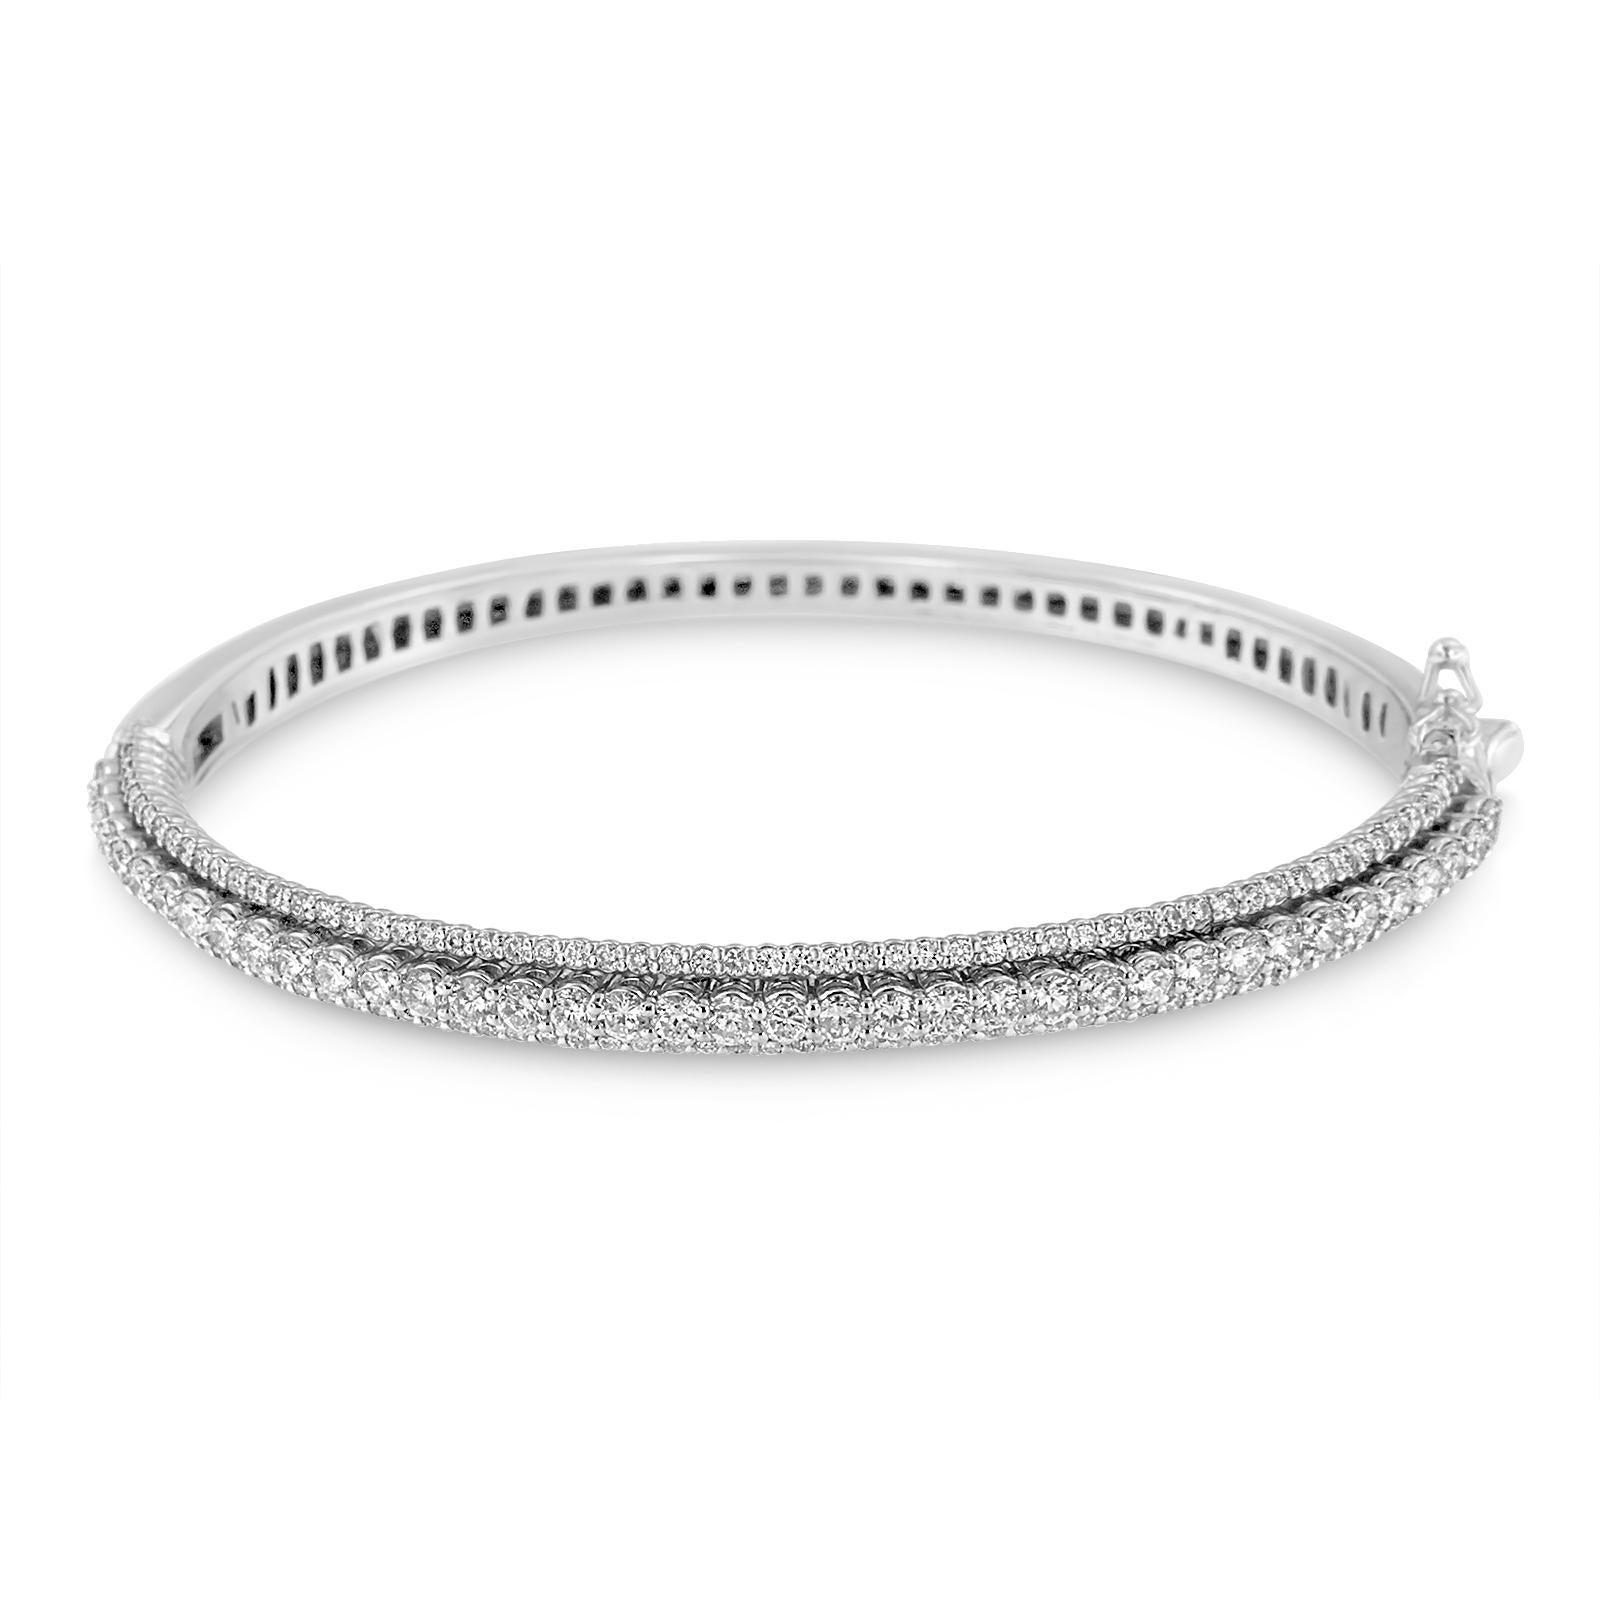 A wave of beauty like no other. Prong-set round-cut diamonds make for a sparkling sensation on this multi-row bangle bracelet, carved out of stunning white gold. Bracelet has 160 natural, round diamonds. Each stone weighs approximately 0.05 for a